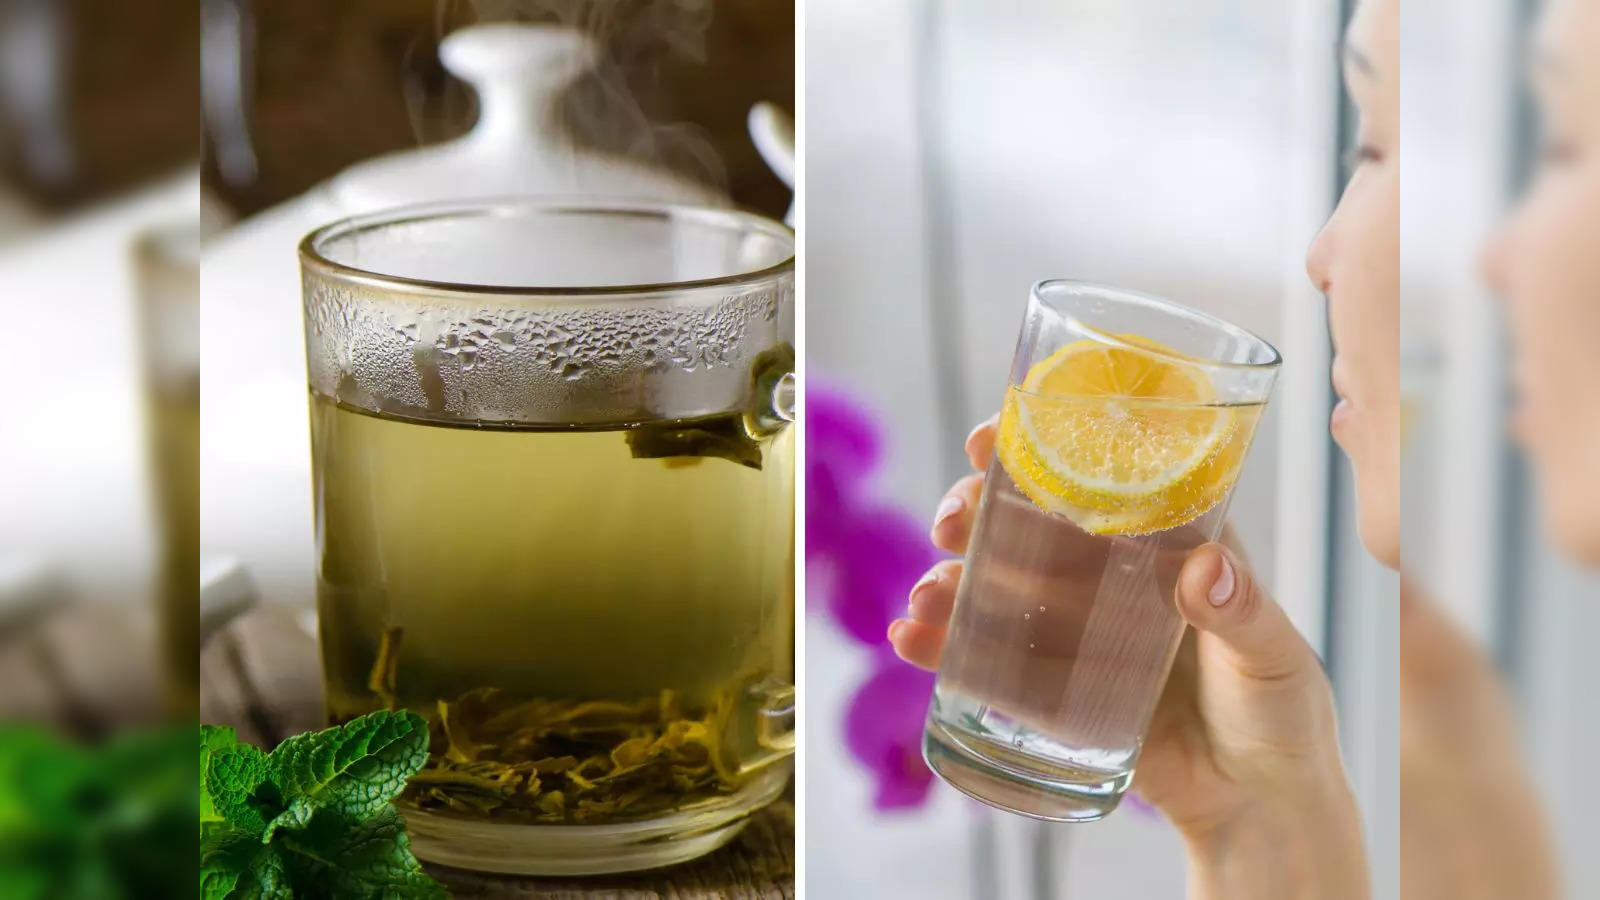 Green Tea For Weight Loss: Know When To Drink For Best Results